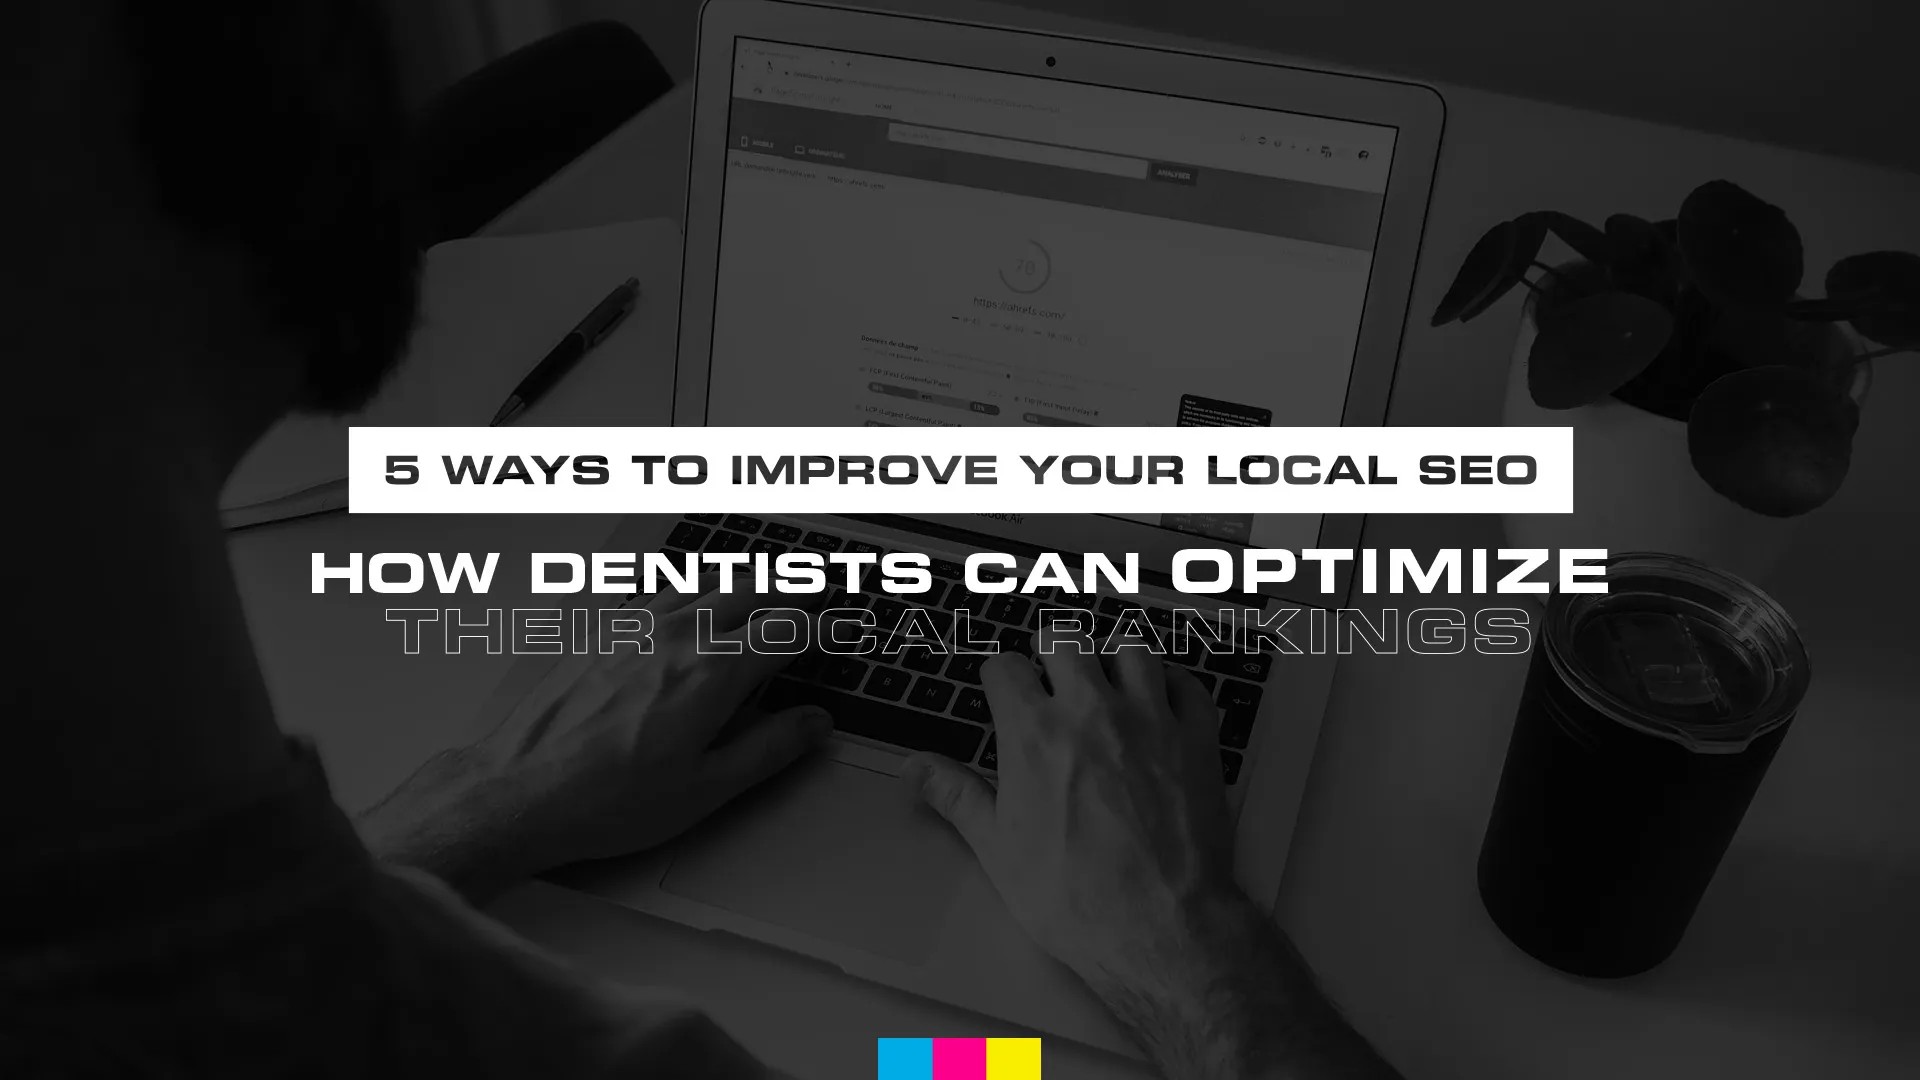 5 Ways to Improve Your Local SEO: How Dentists Can Optimize